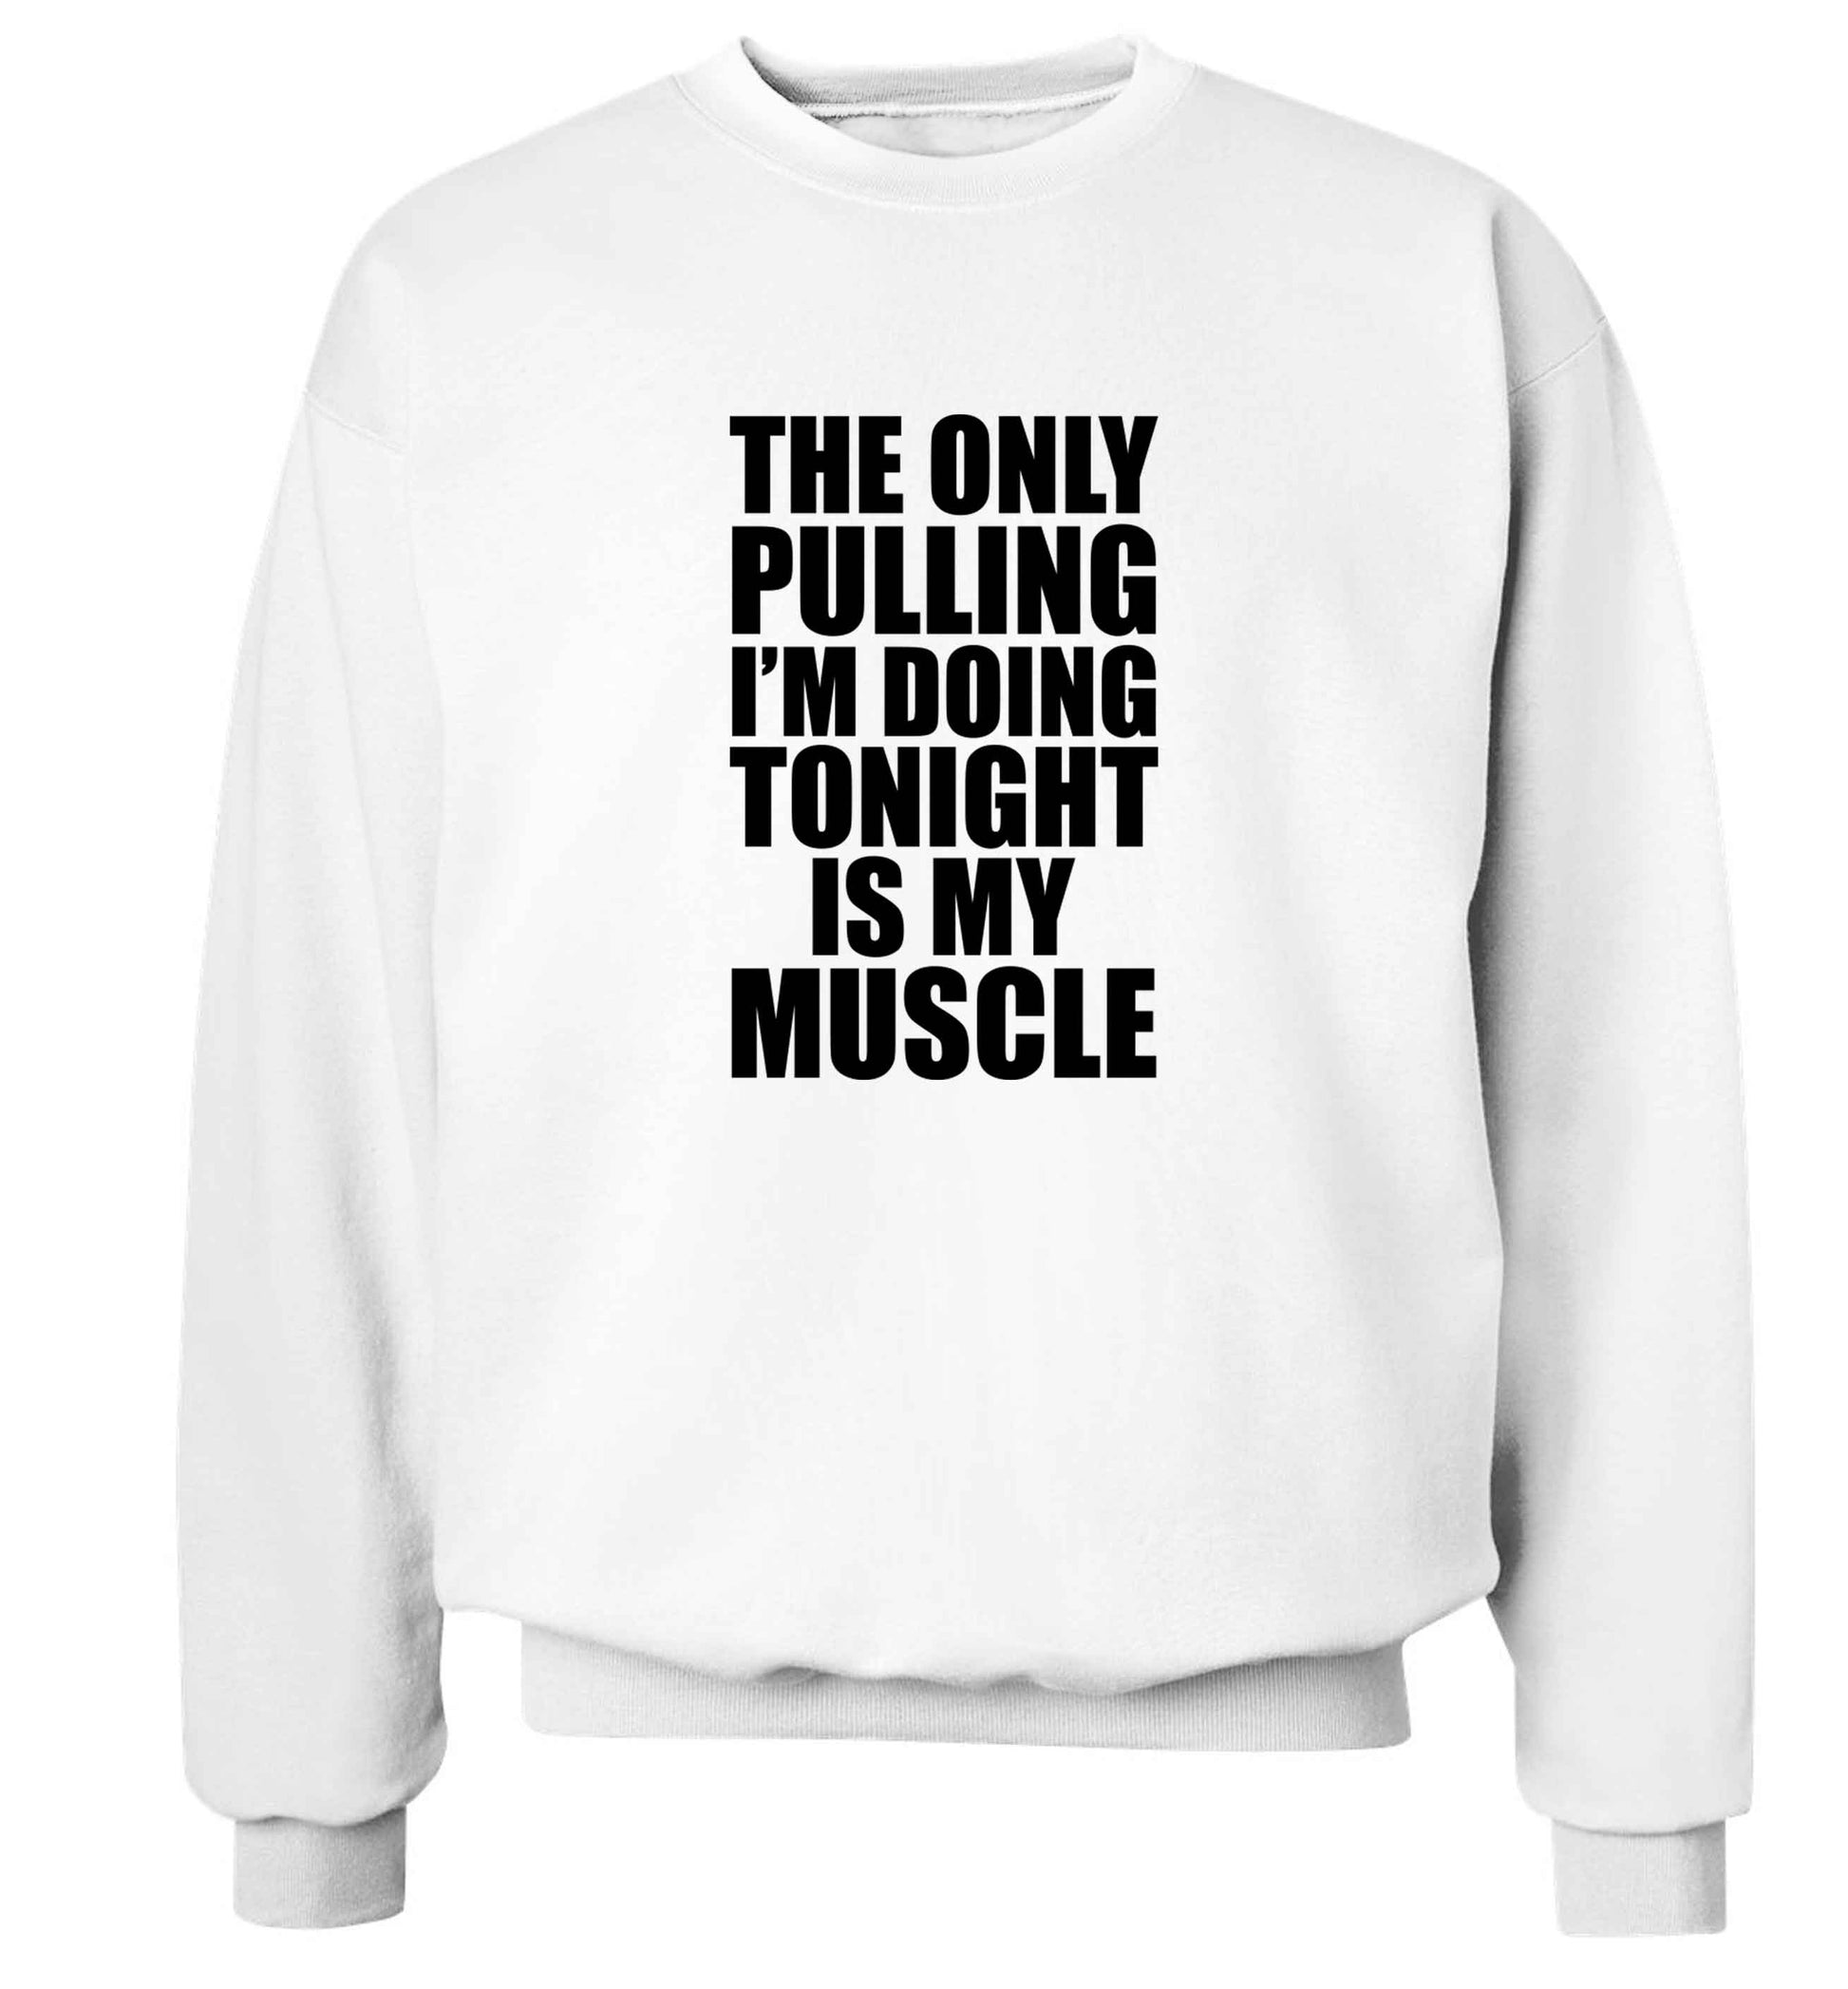 The only pulling I'm doing tonight is my muscle adult's unisex white sweater 2XL